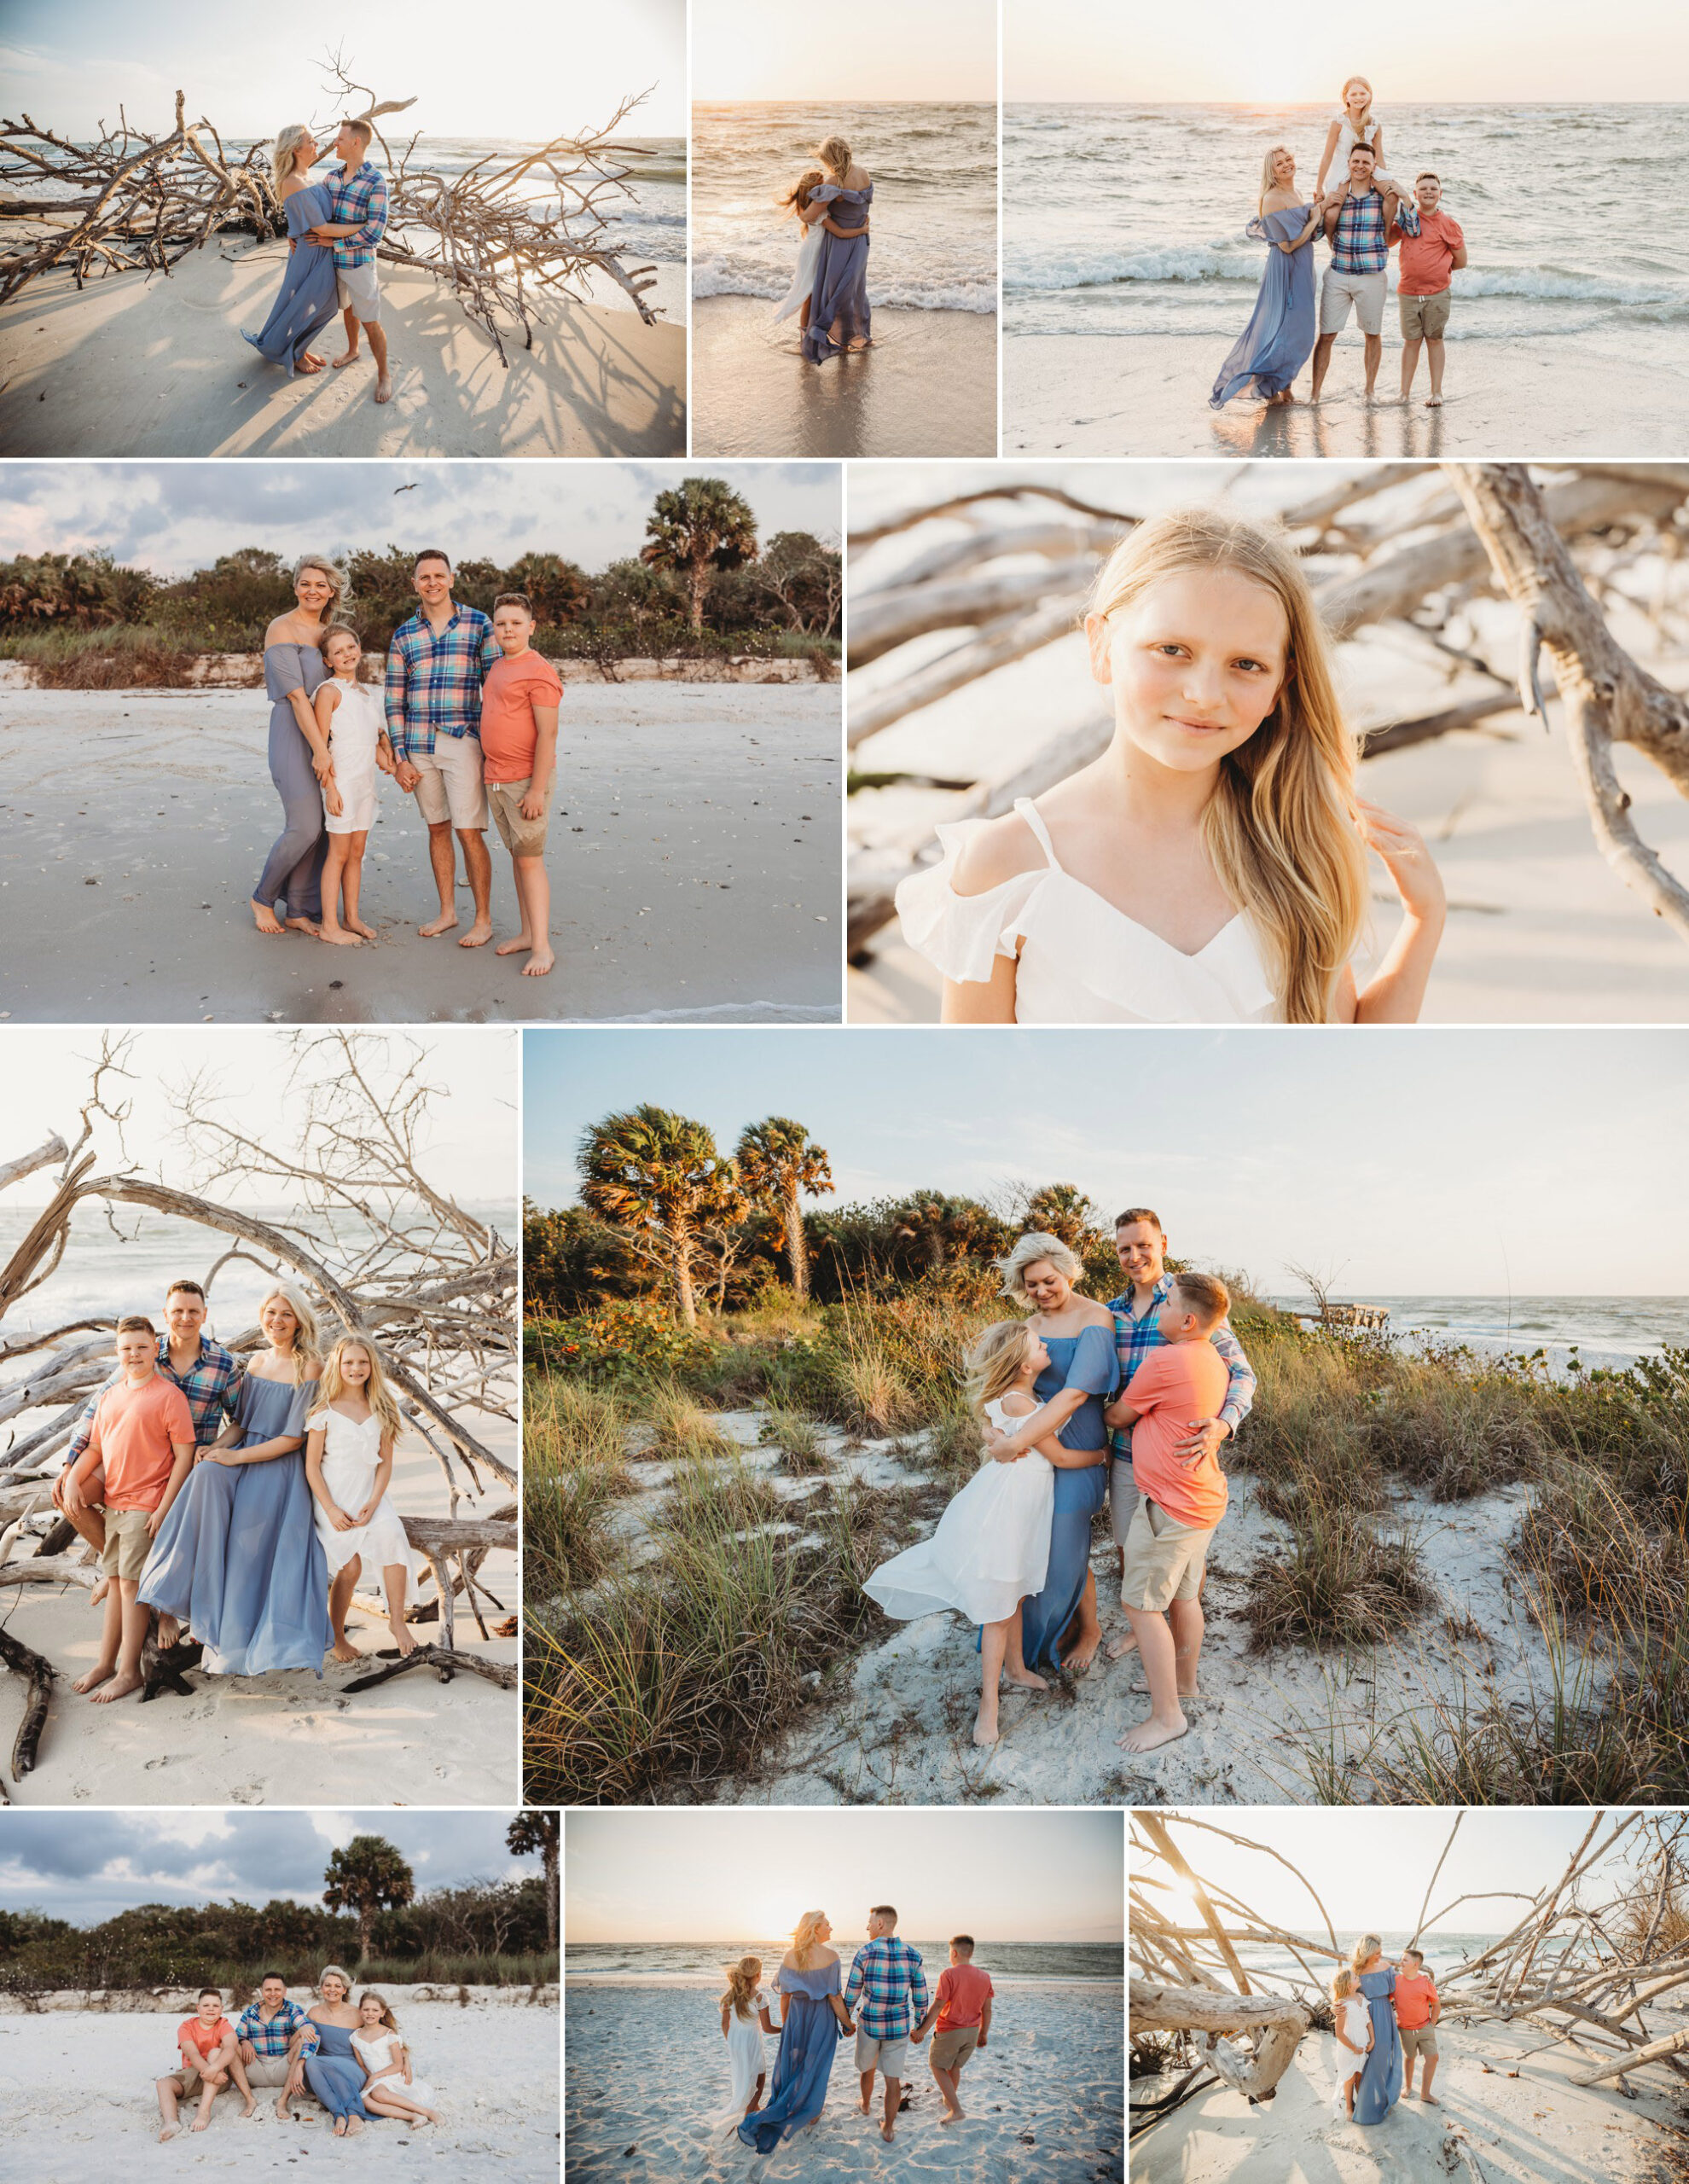 Beach family portraits on a beautiful sunset stretch of beach in Florida. This family of four smiles and hugs for candid beach portraits as the sun goes down.